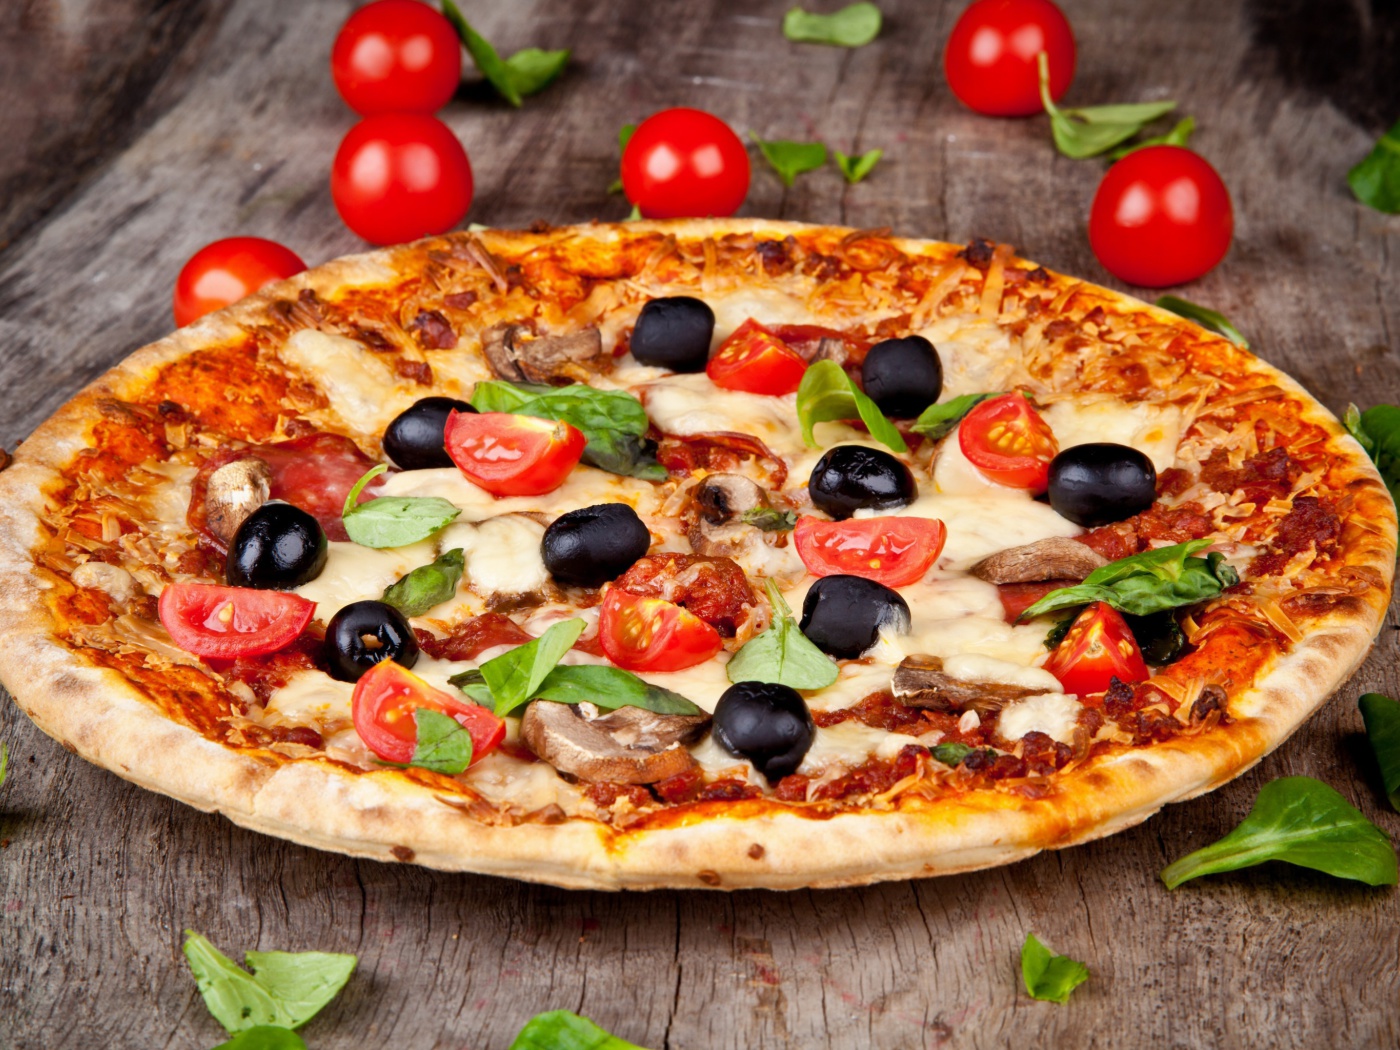 Pizza with tomatoes and olives wallpaper 1400x1050